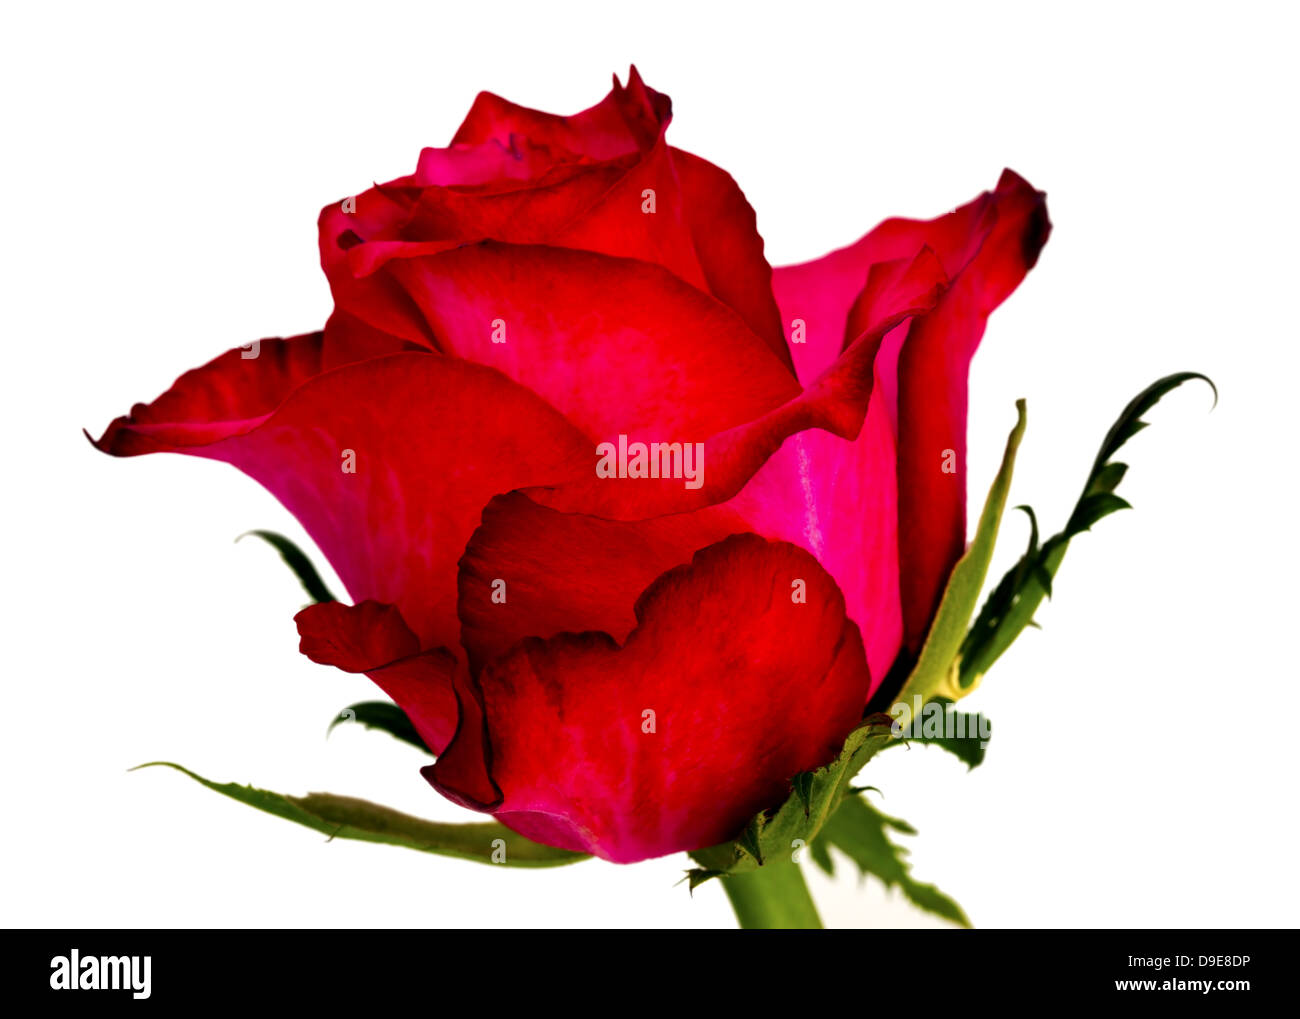 Deep pink petals Cut Out Stock Images & Pictures - Alamy